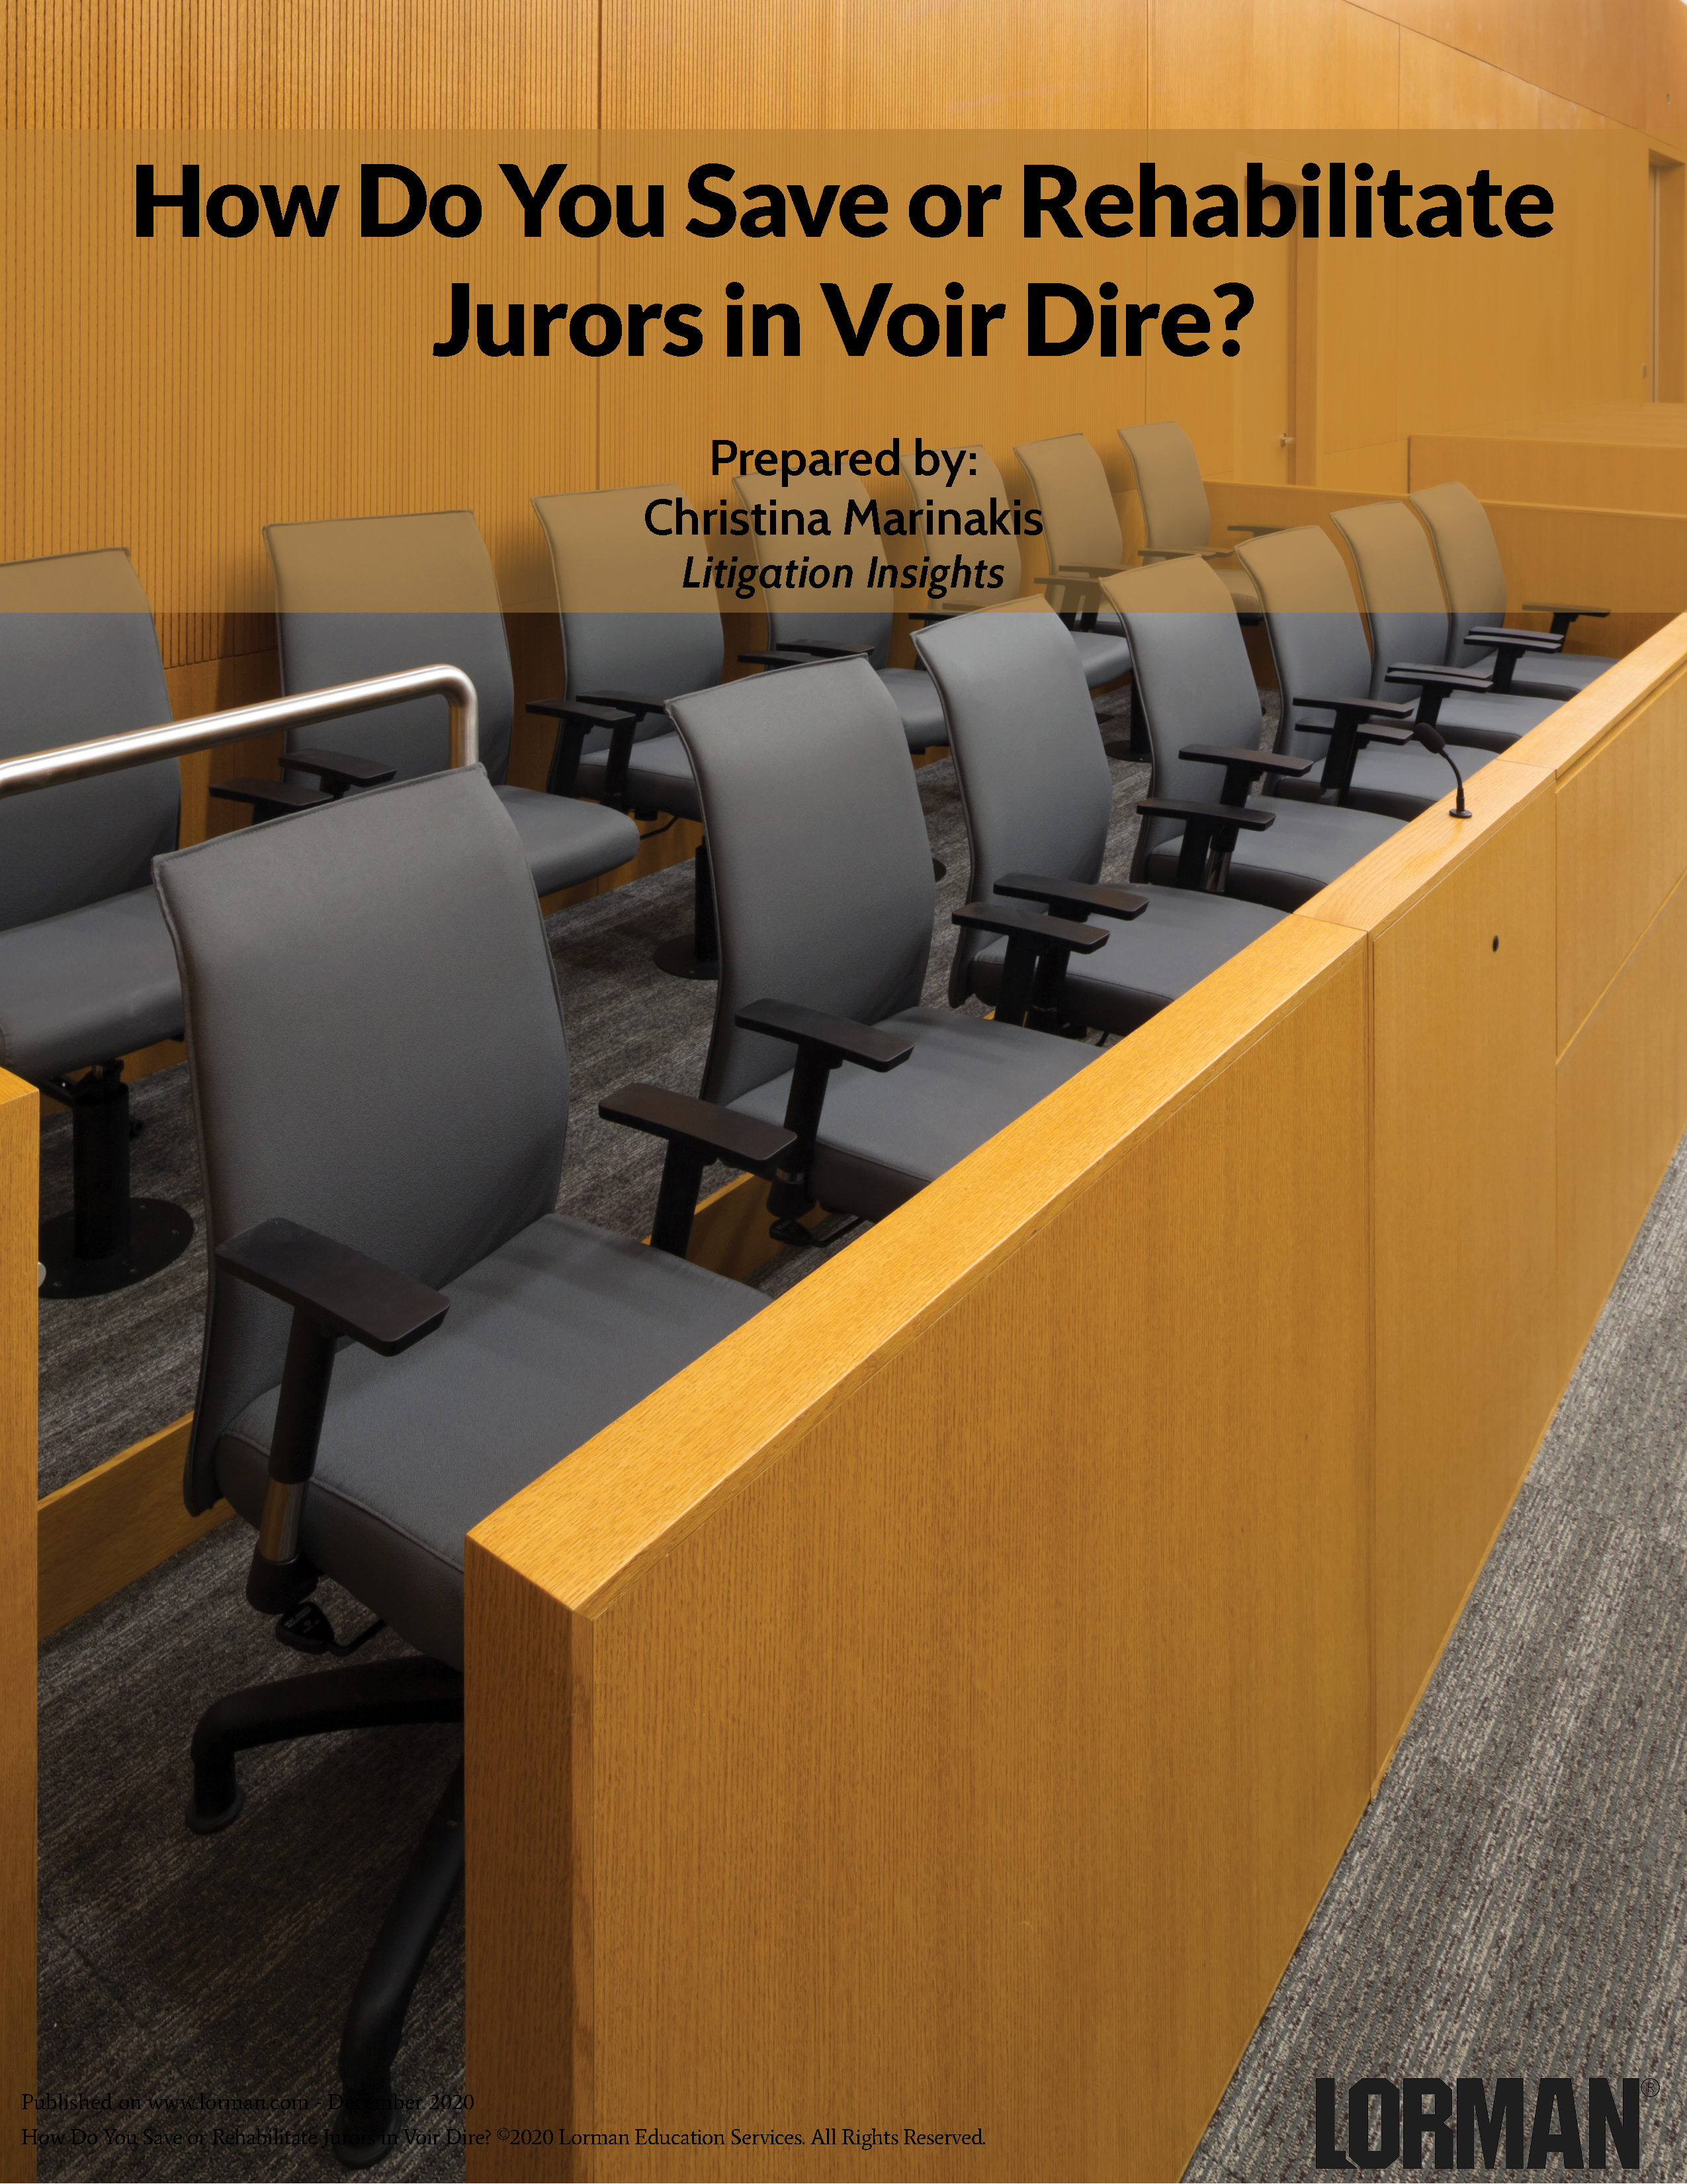 How Do You Save or Rehabilitate Jurors in Voir Dire?